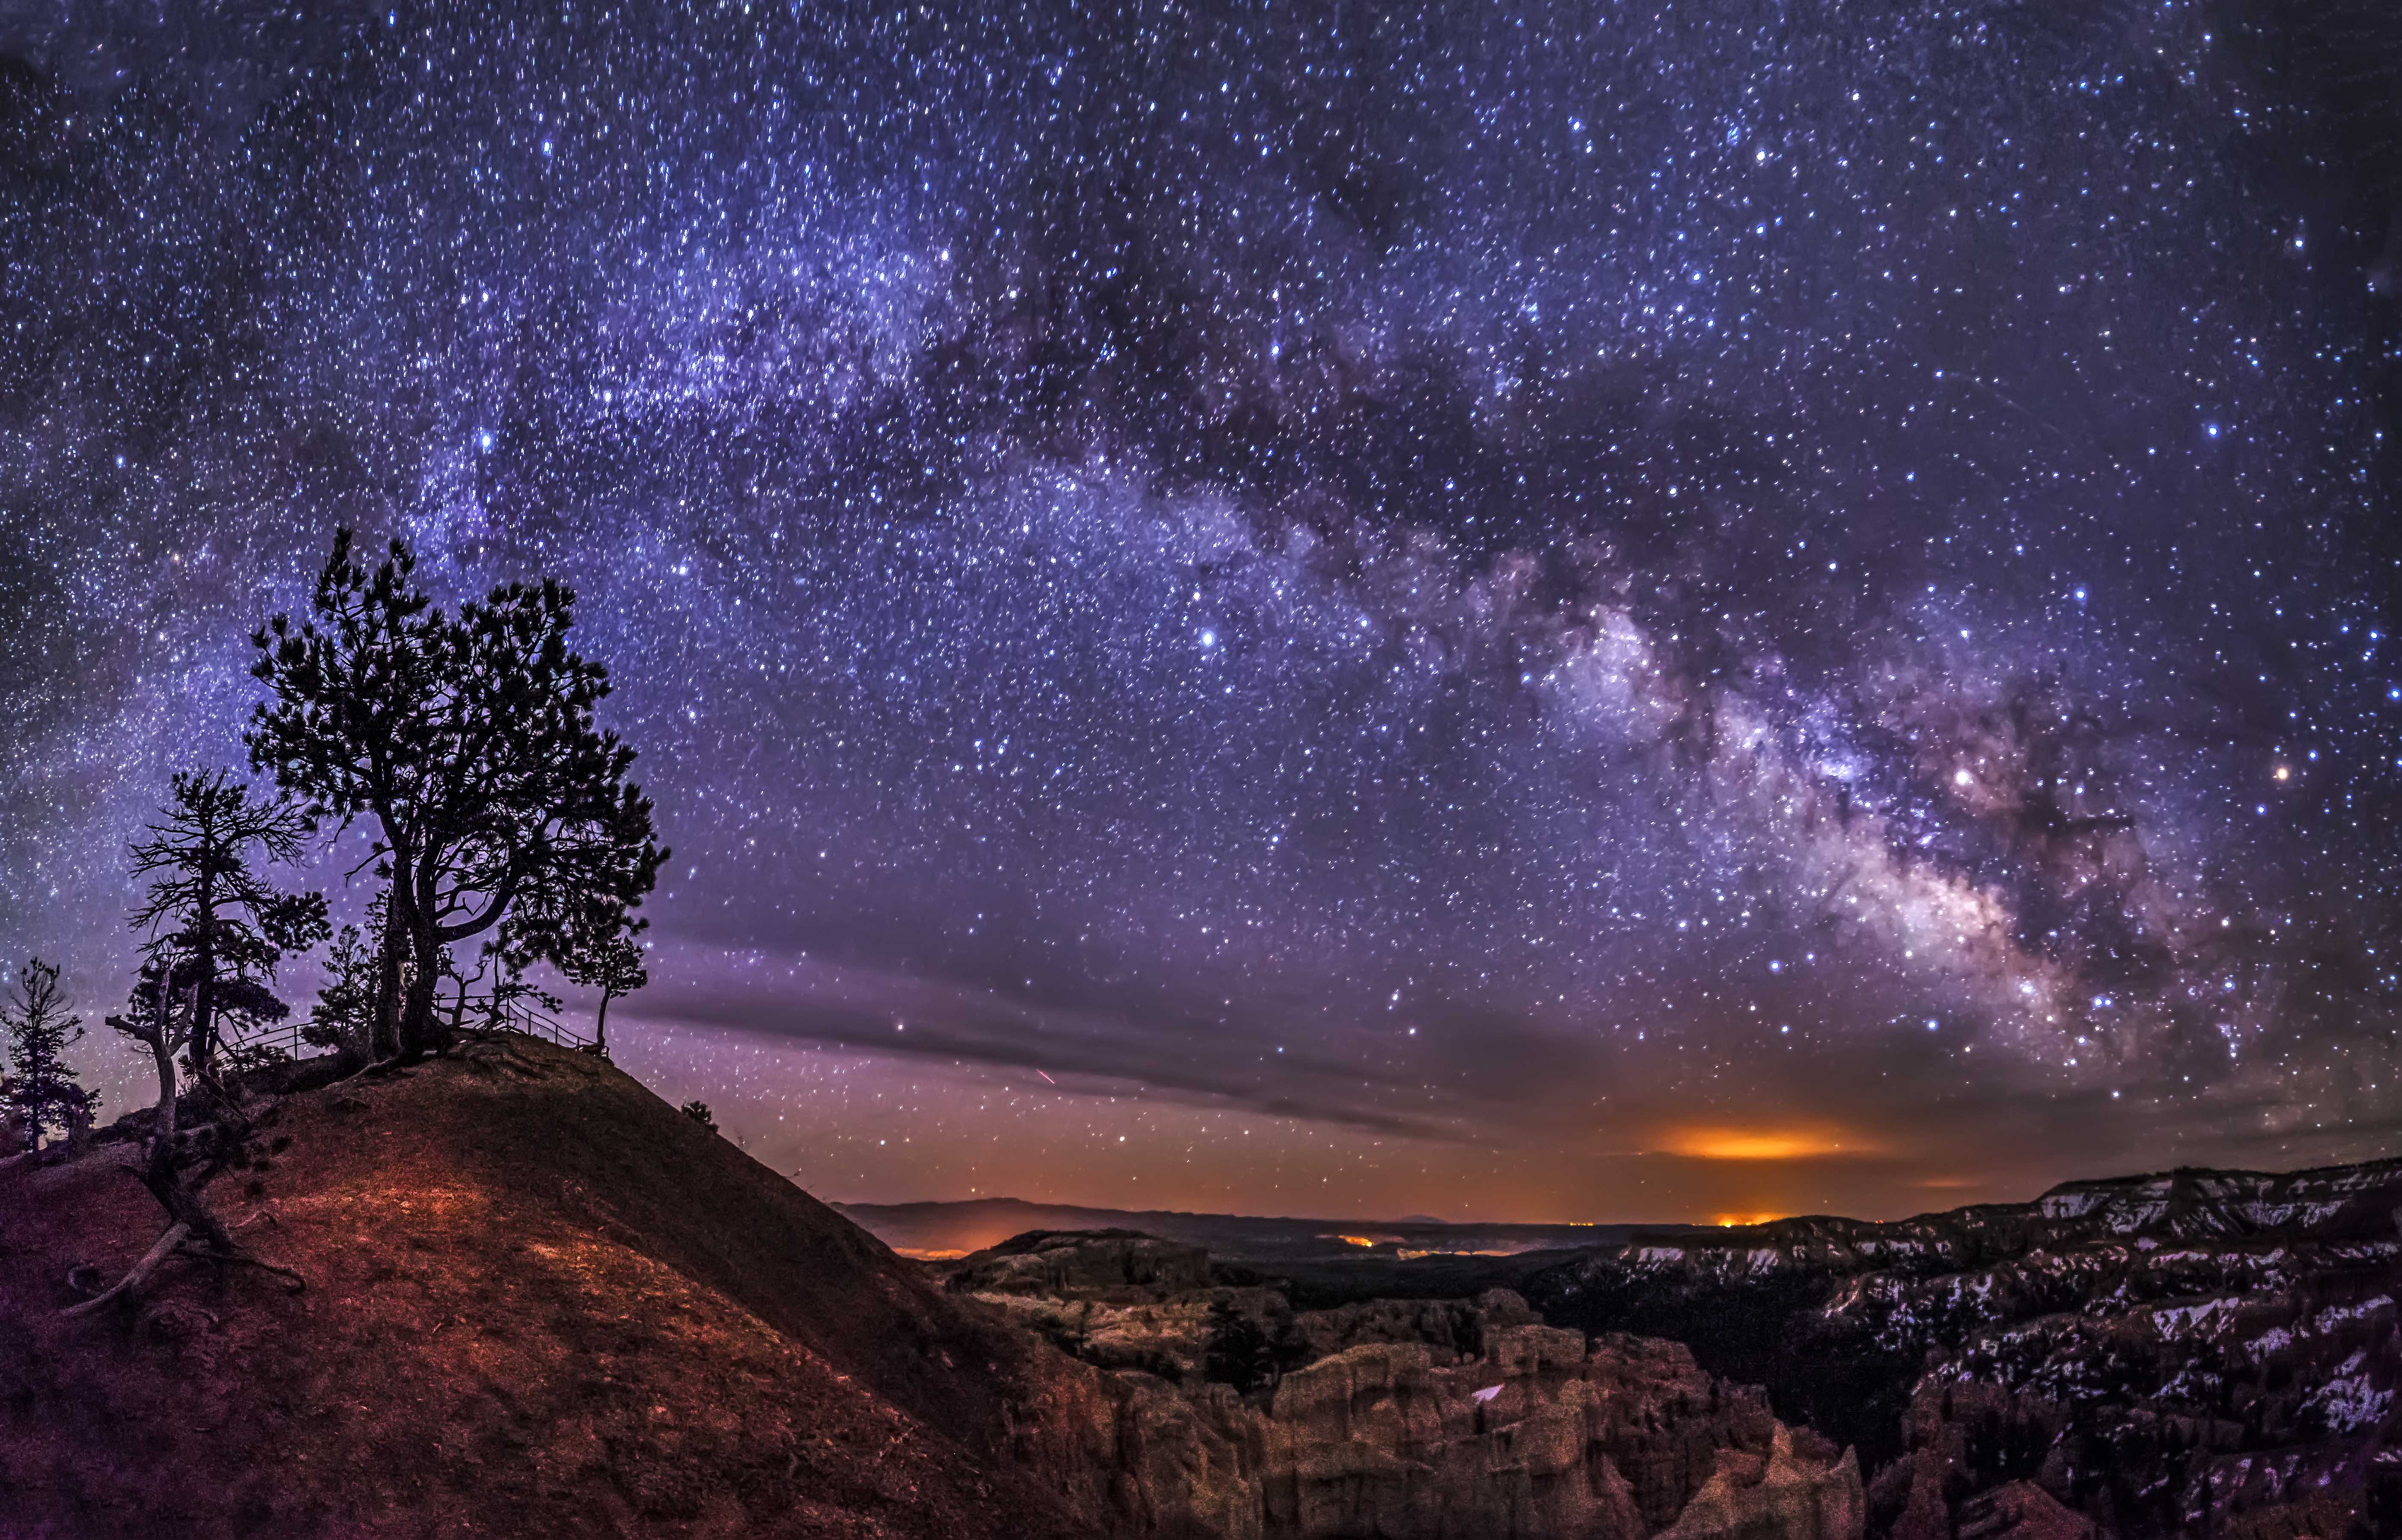 Night sky at Bryce Canyon is like nothing else, the stars pop out like